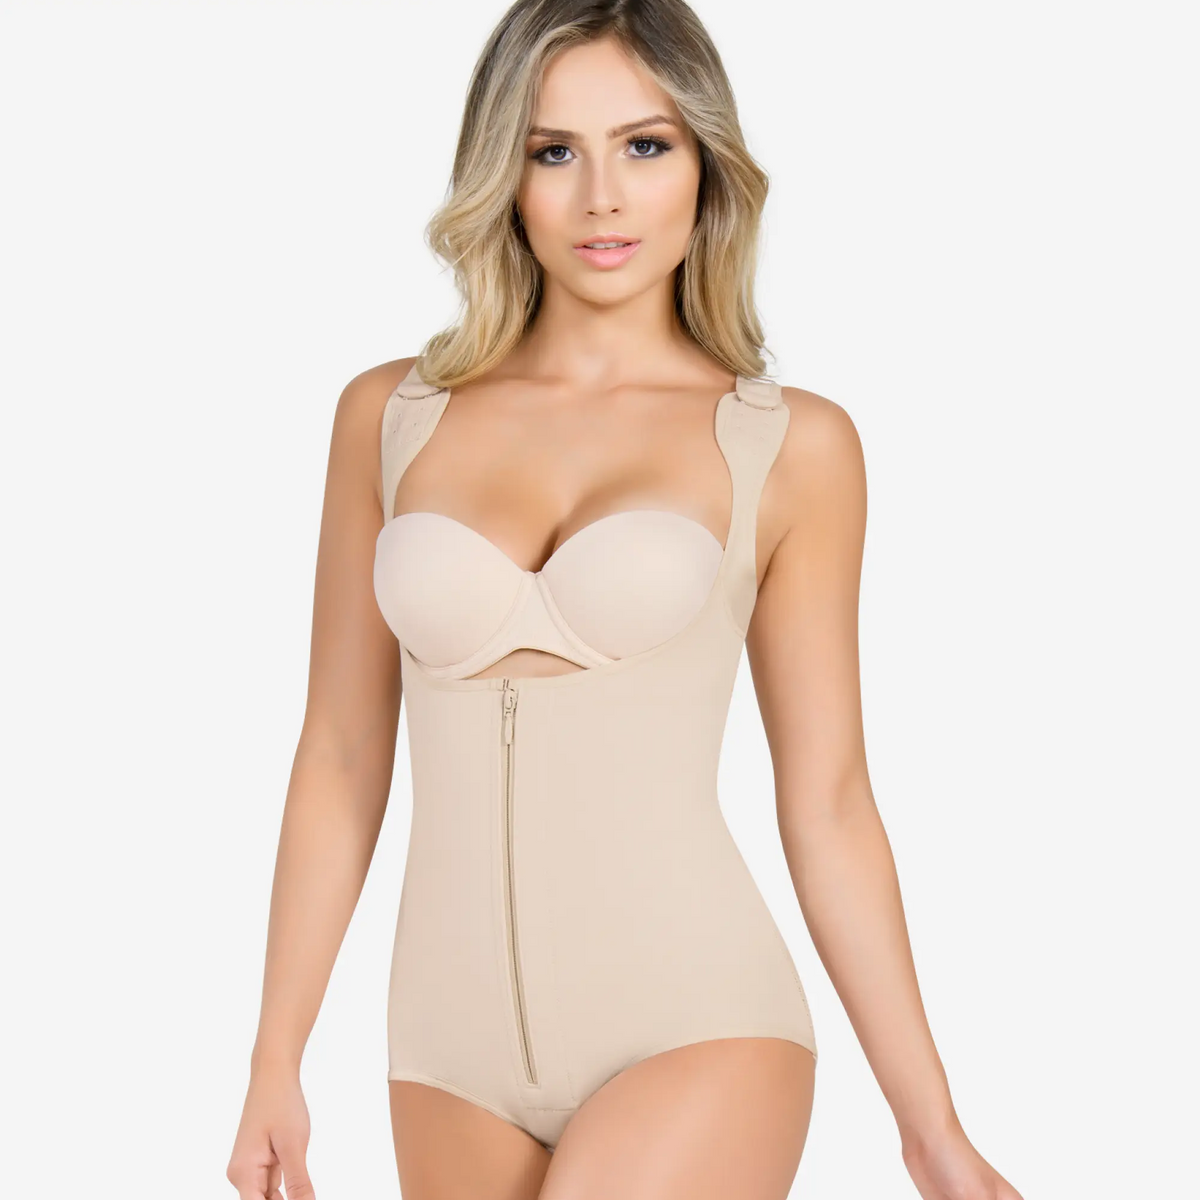 Thermal Body Shaper With Wide Straps - CYSM Colombian Shaper — CYSM Shapers